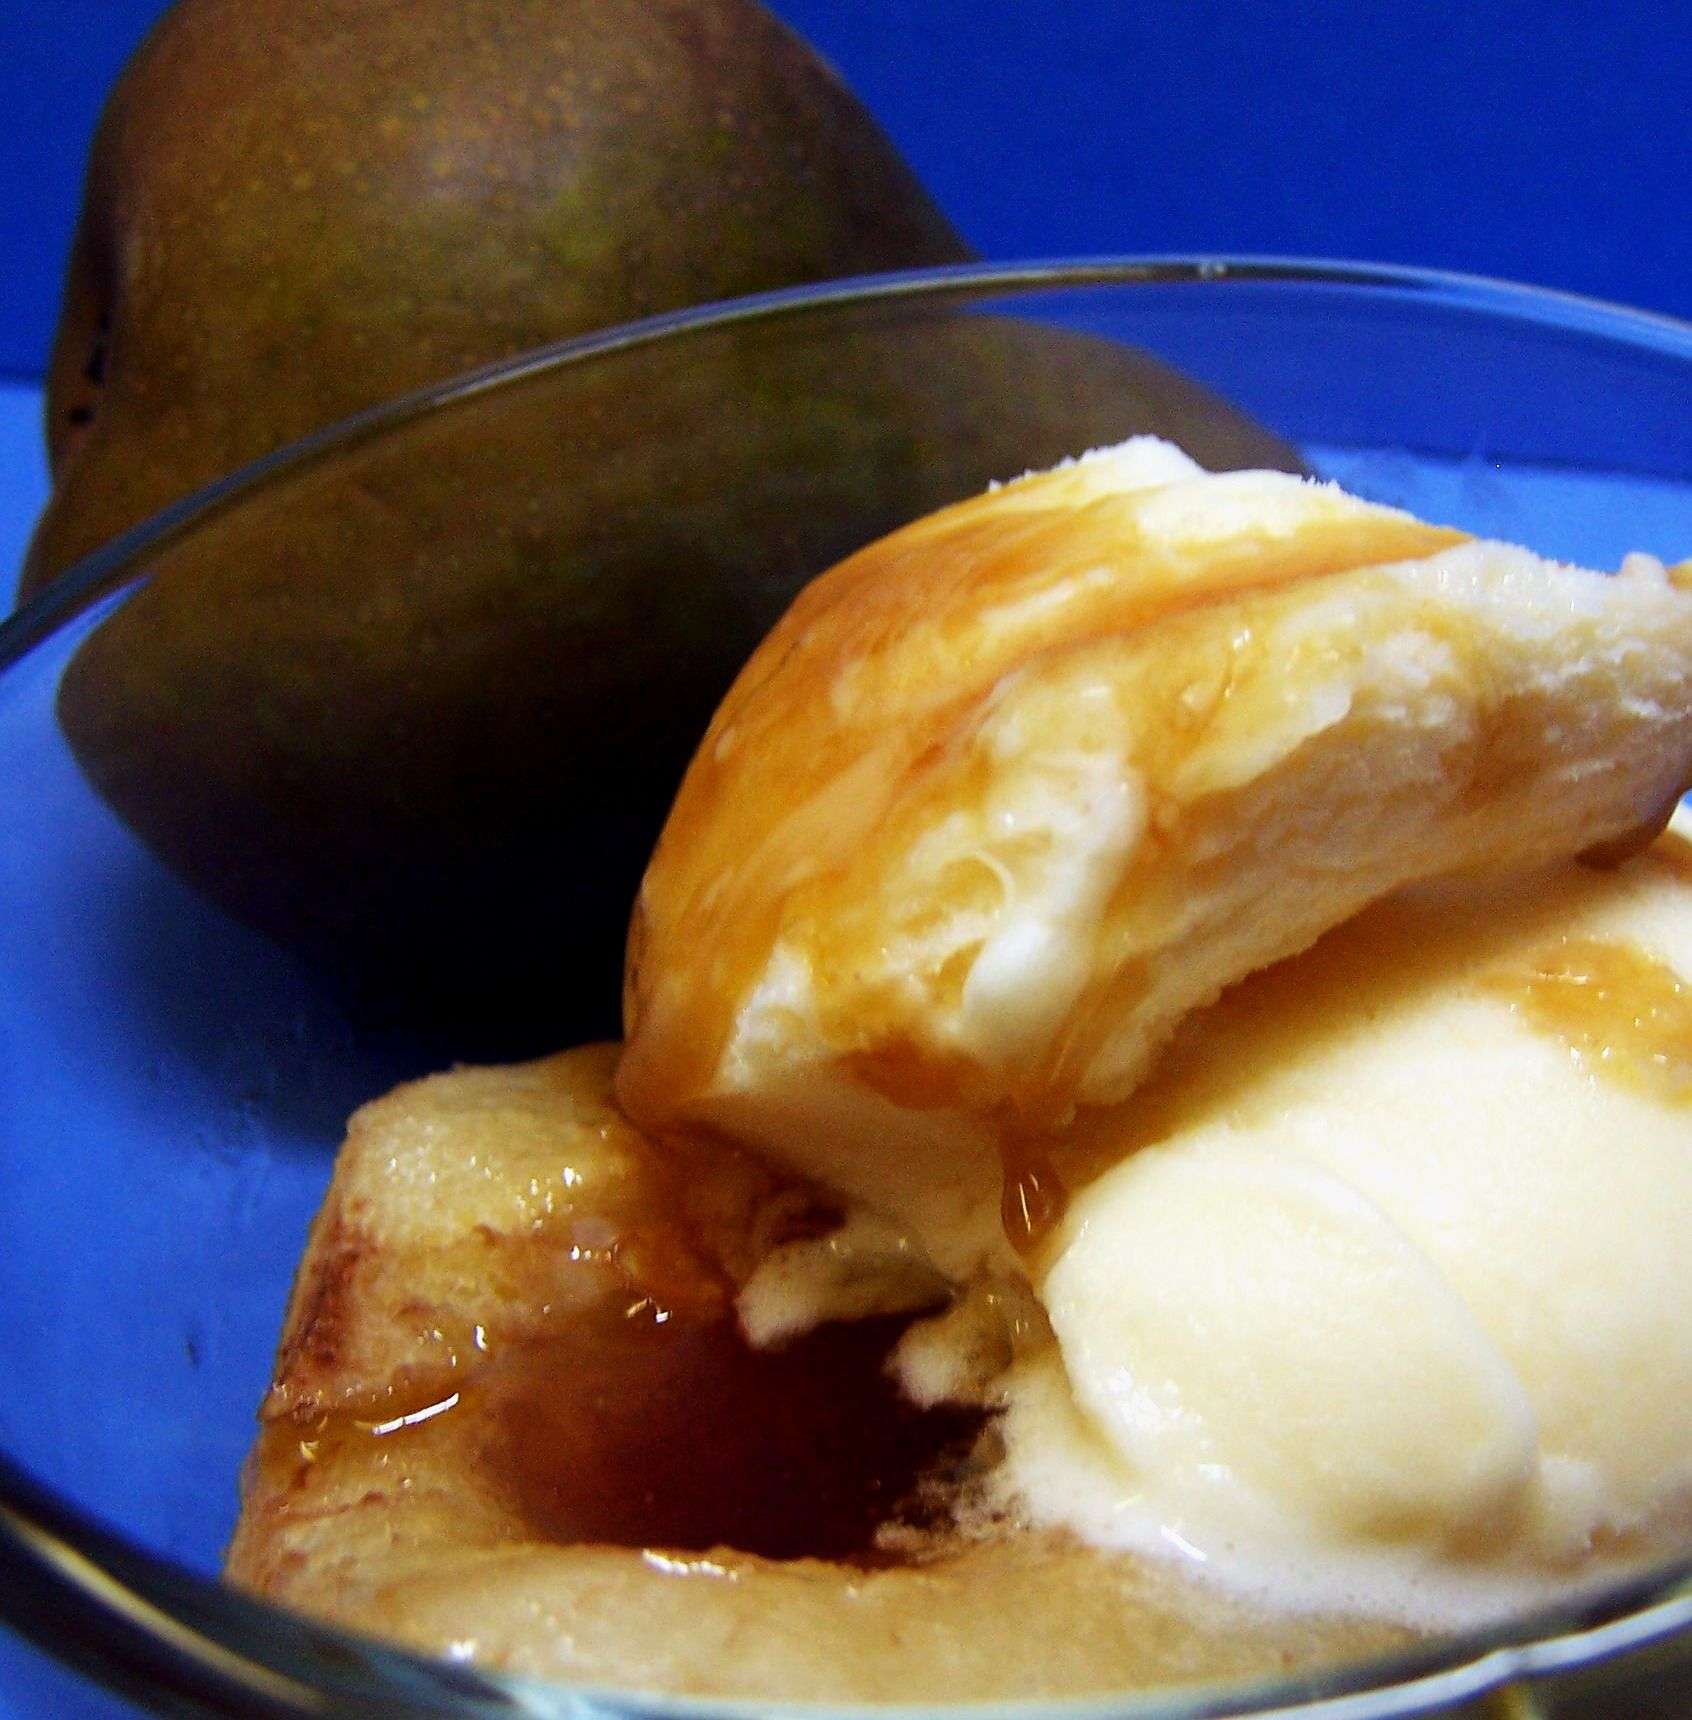 Roasted Pears With Brown Sugar and Vanilla Ice Cream